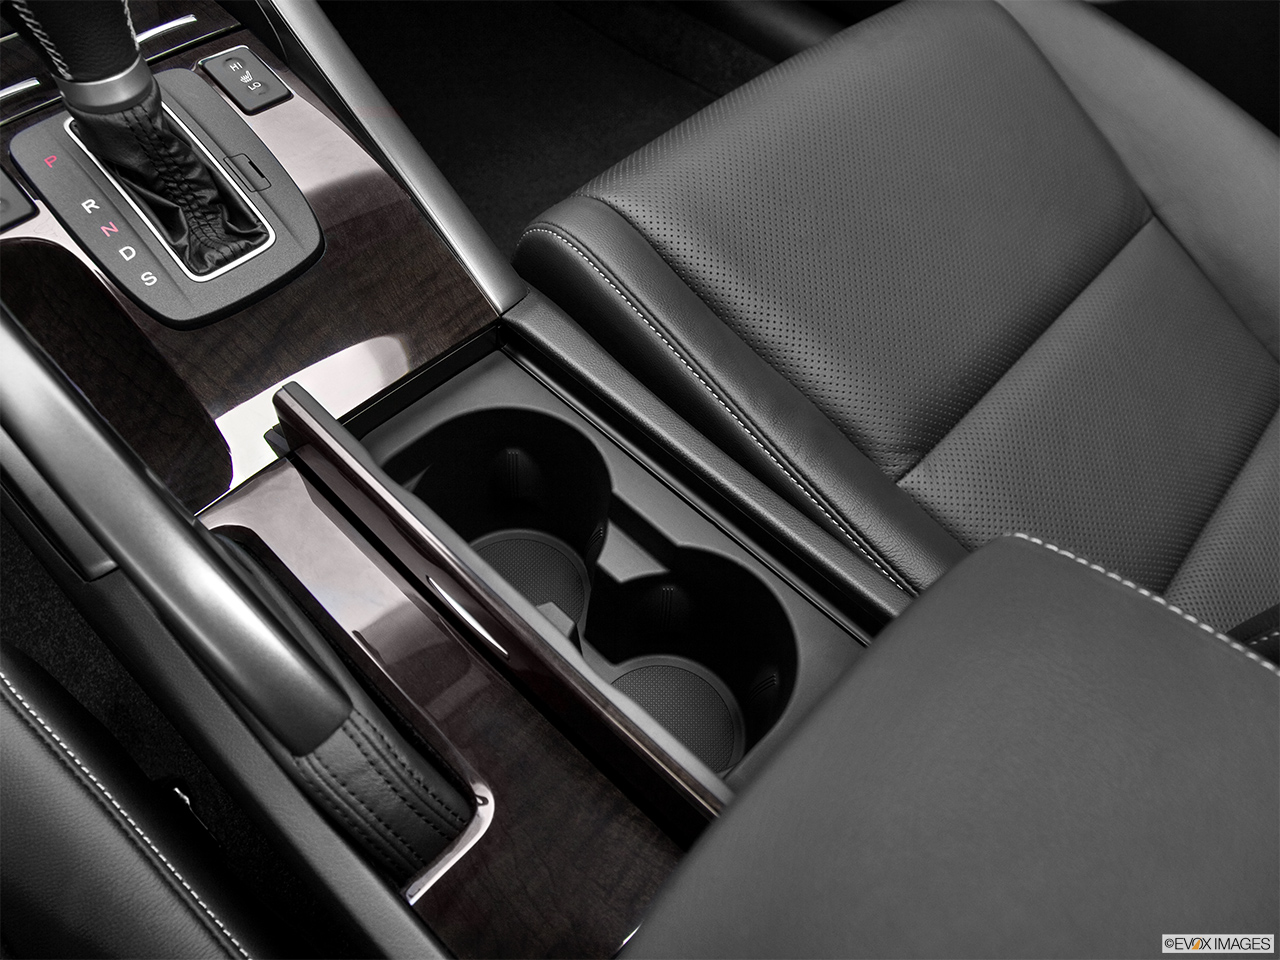 2012 Acura TSX TSX 5-speed Automatic Cup holders. 